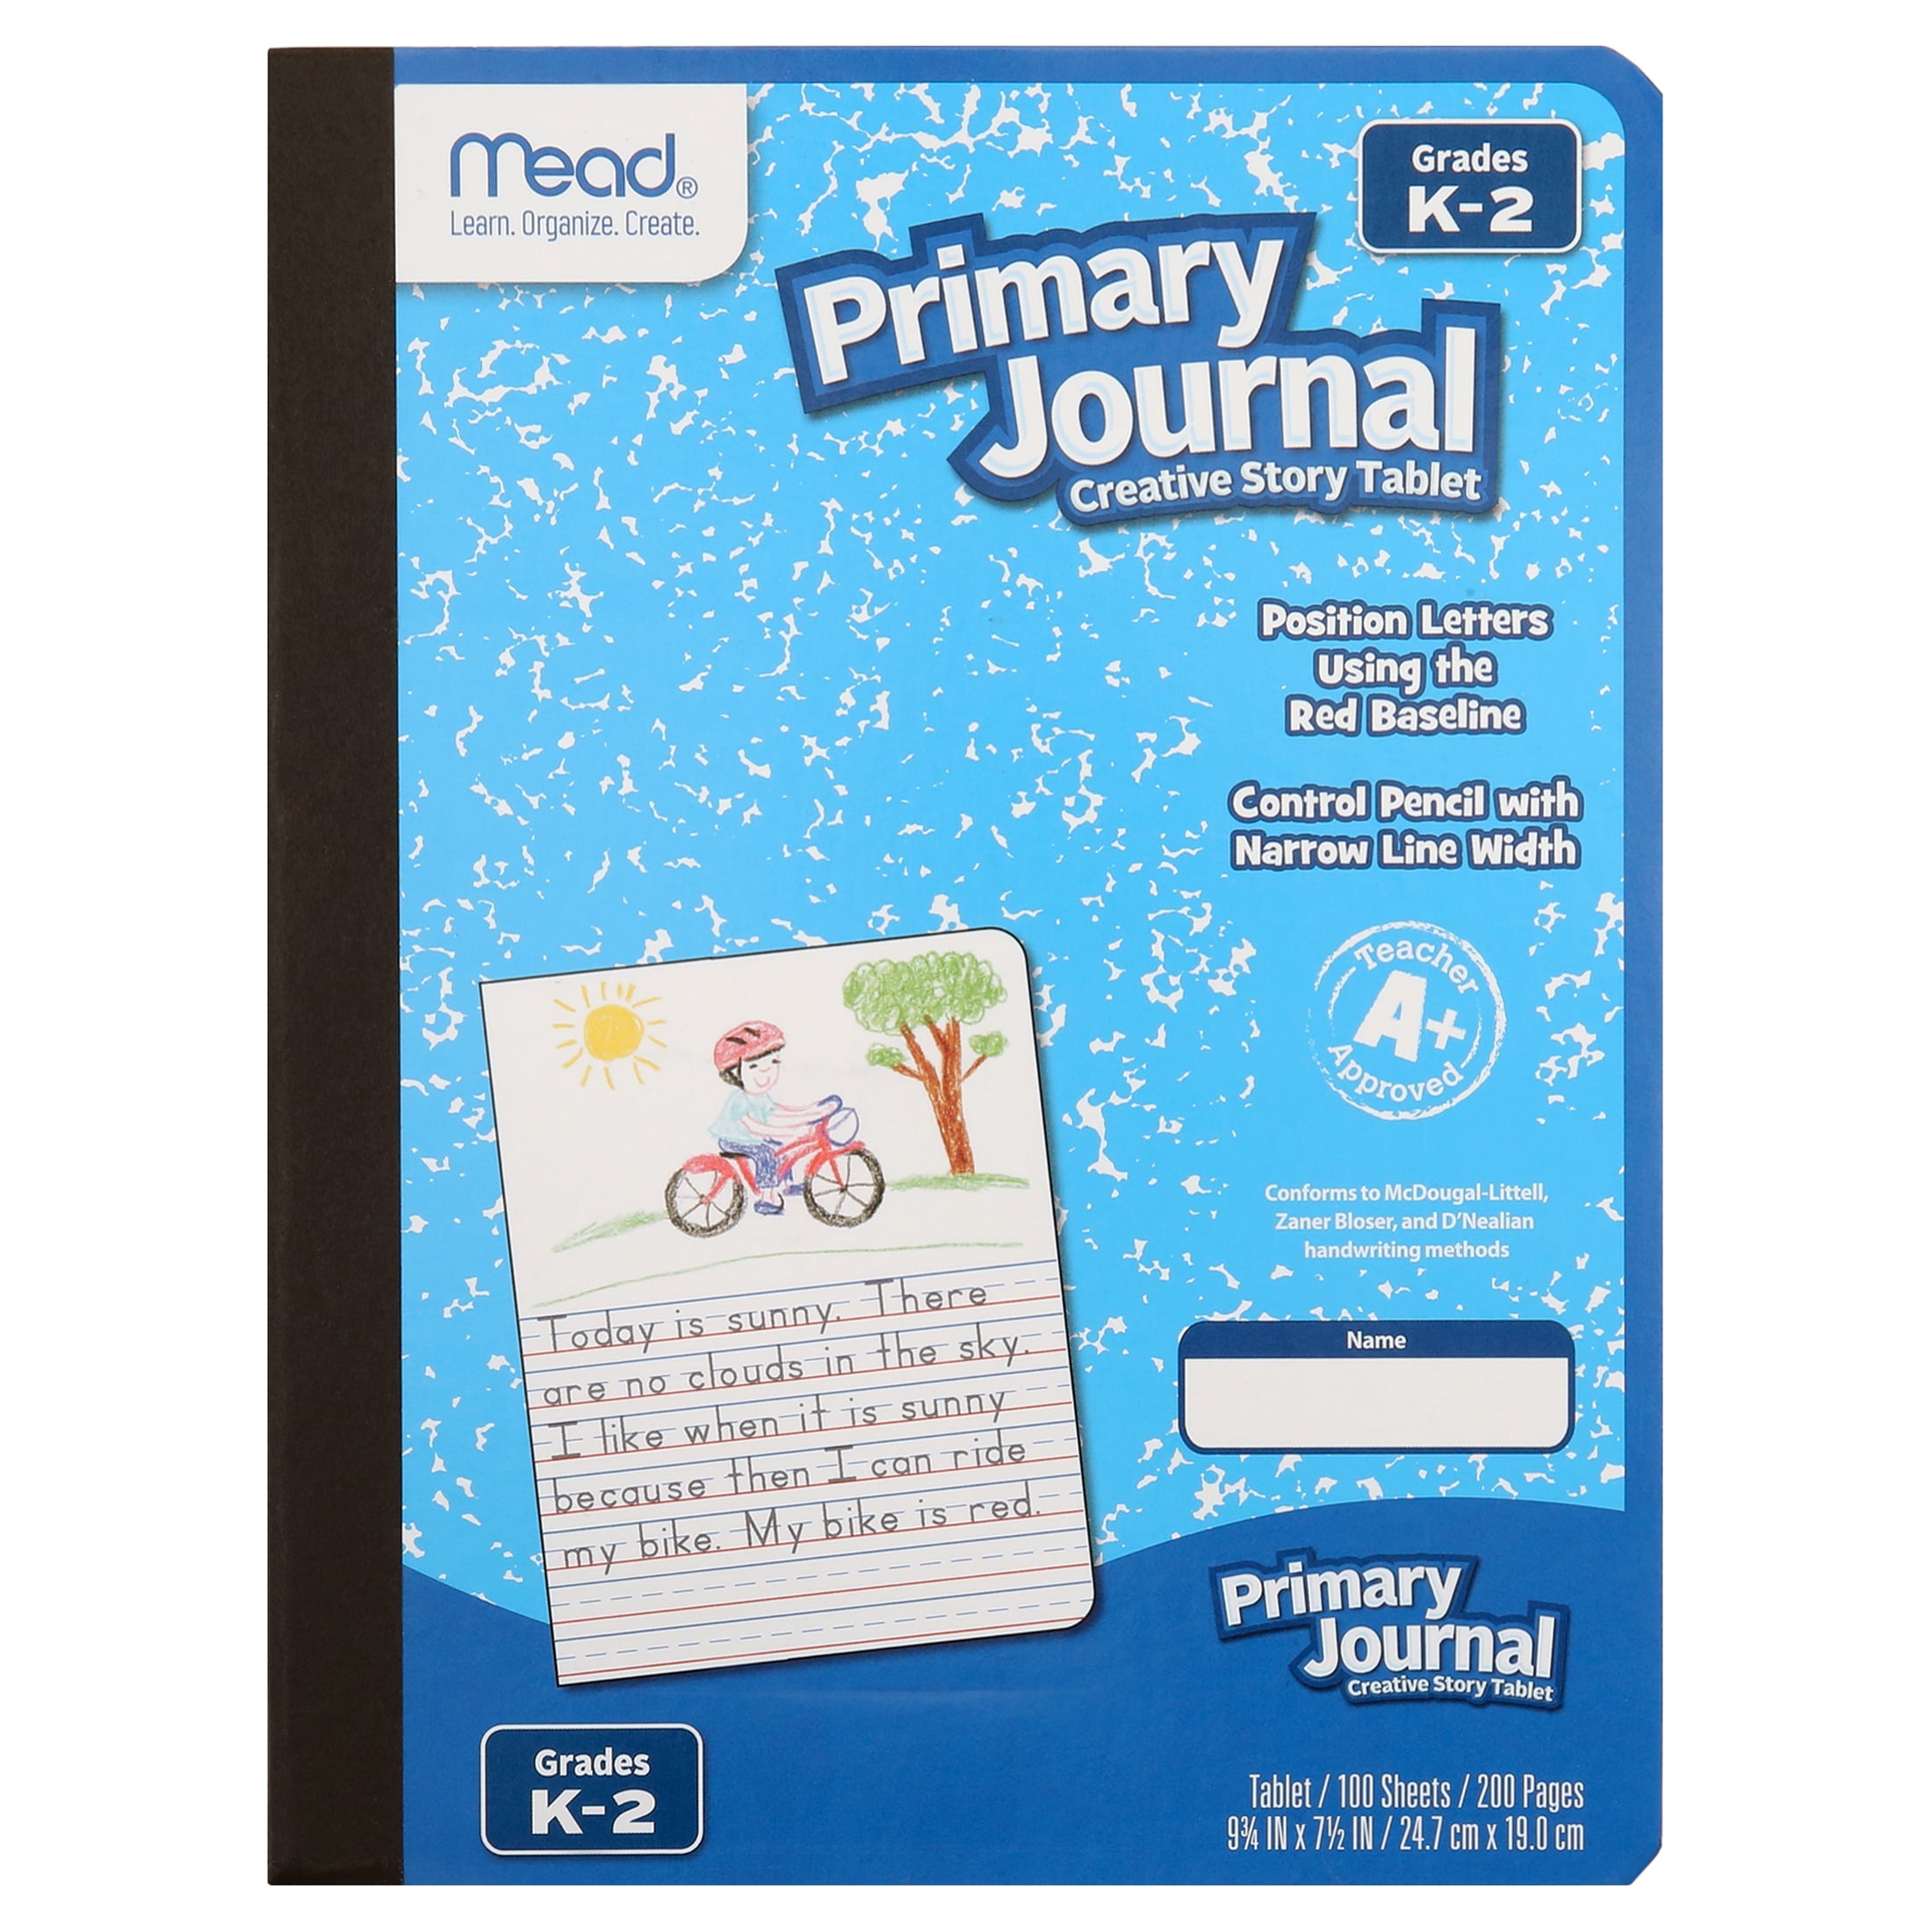 100-Sheet Mead Primary Journal Half Page Ruled for Early Learning $0.50 + Free S&H w/ Walmart+ or $35+